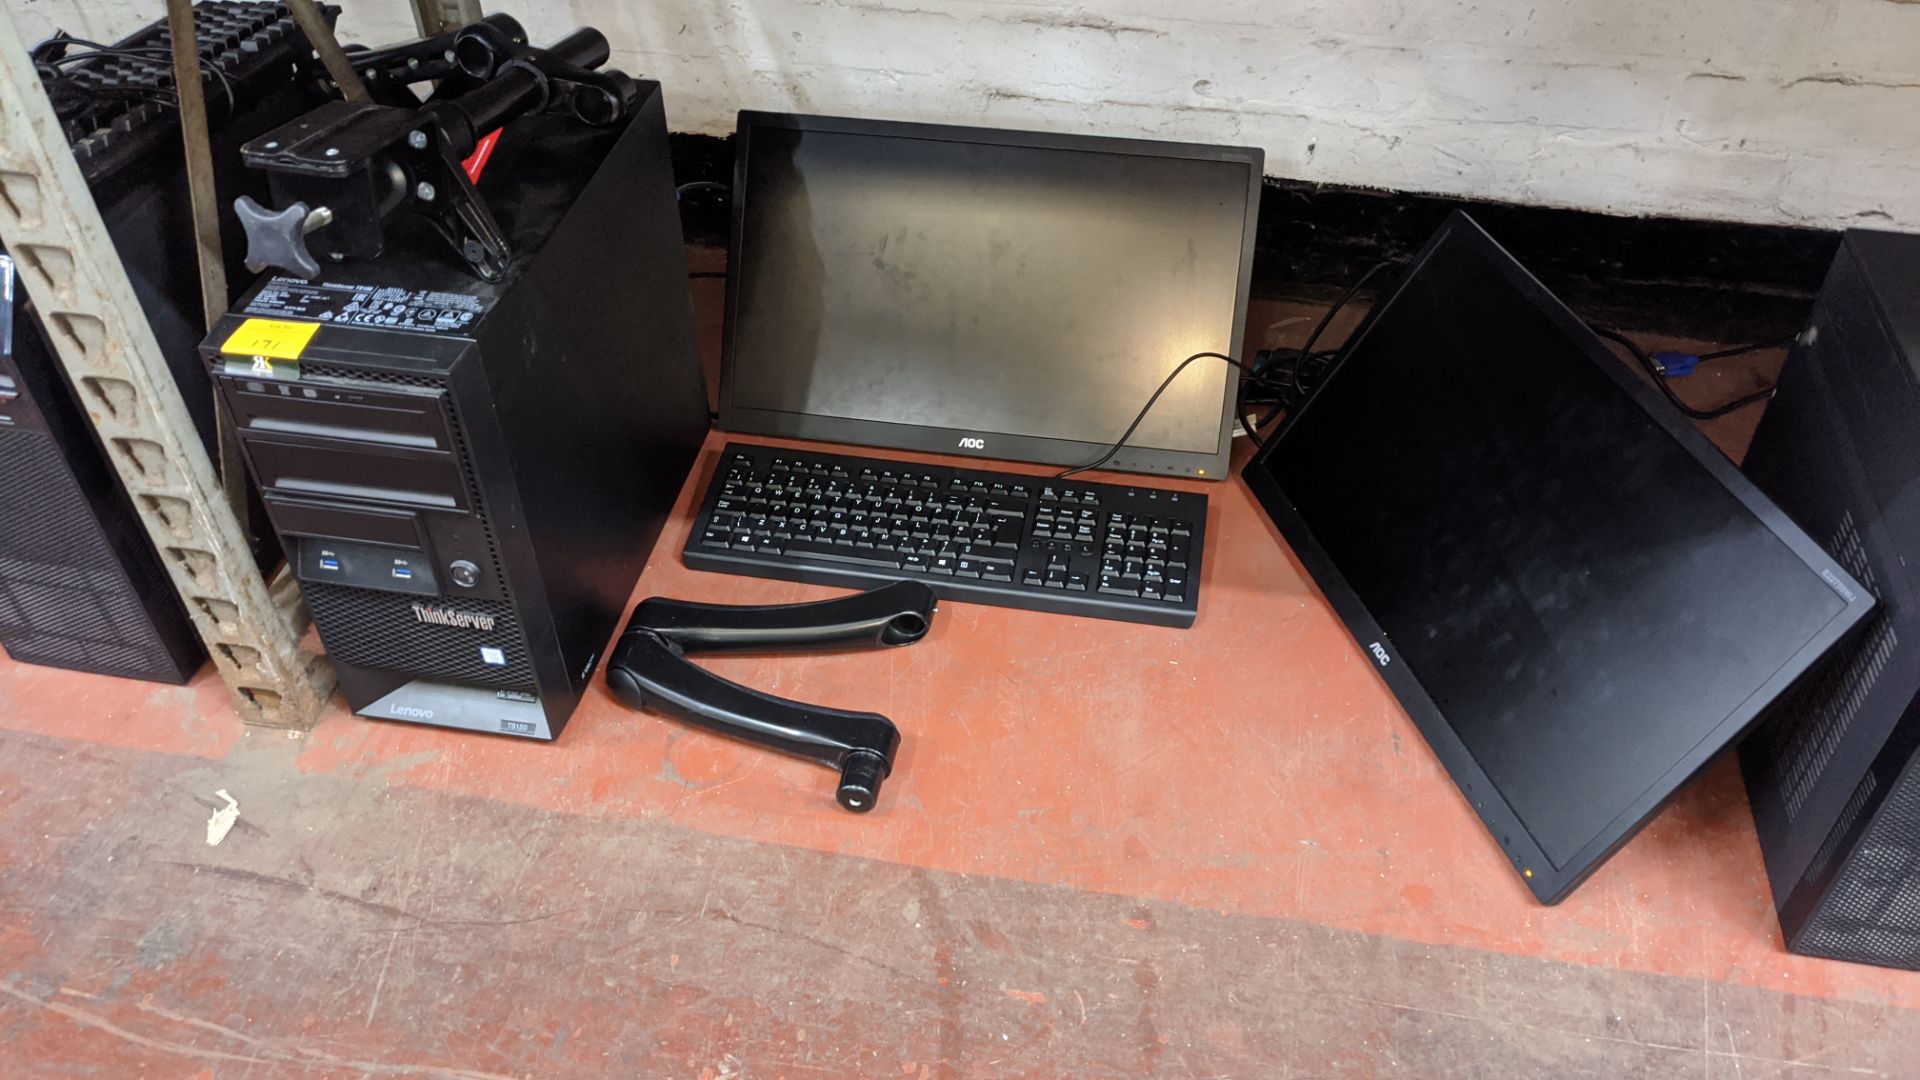 Lenovo Think Server TS150 including keyboard, 2 off monitors & monitor stand . This is one a